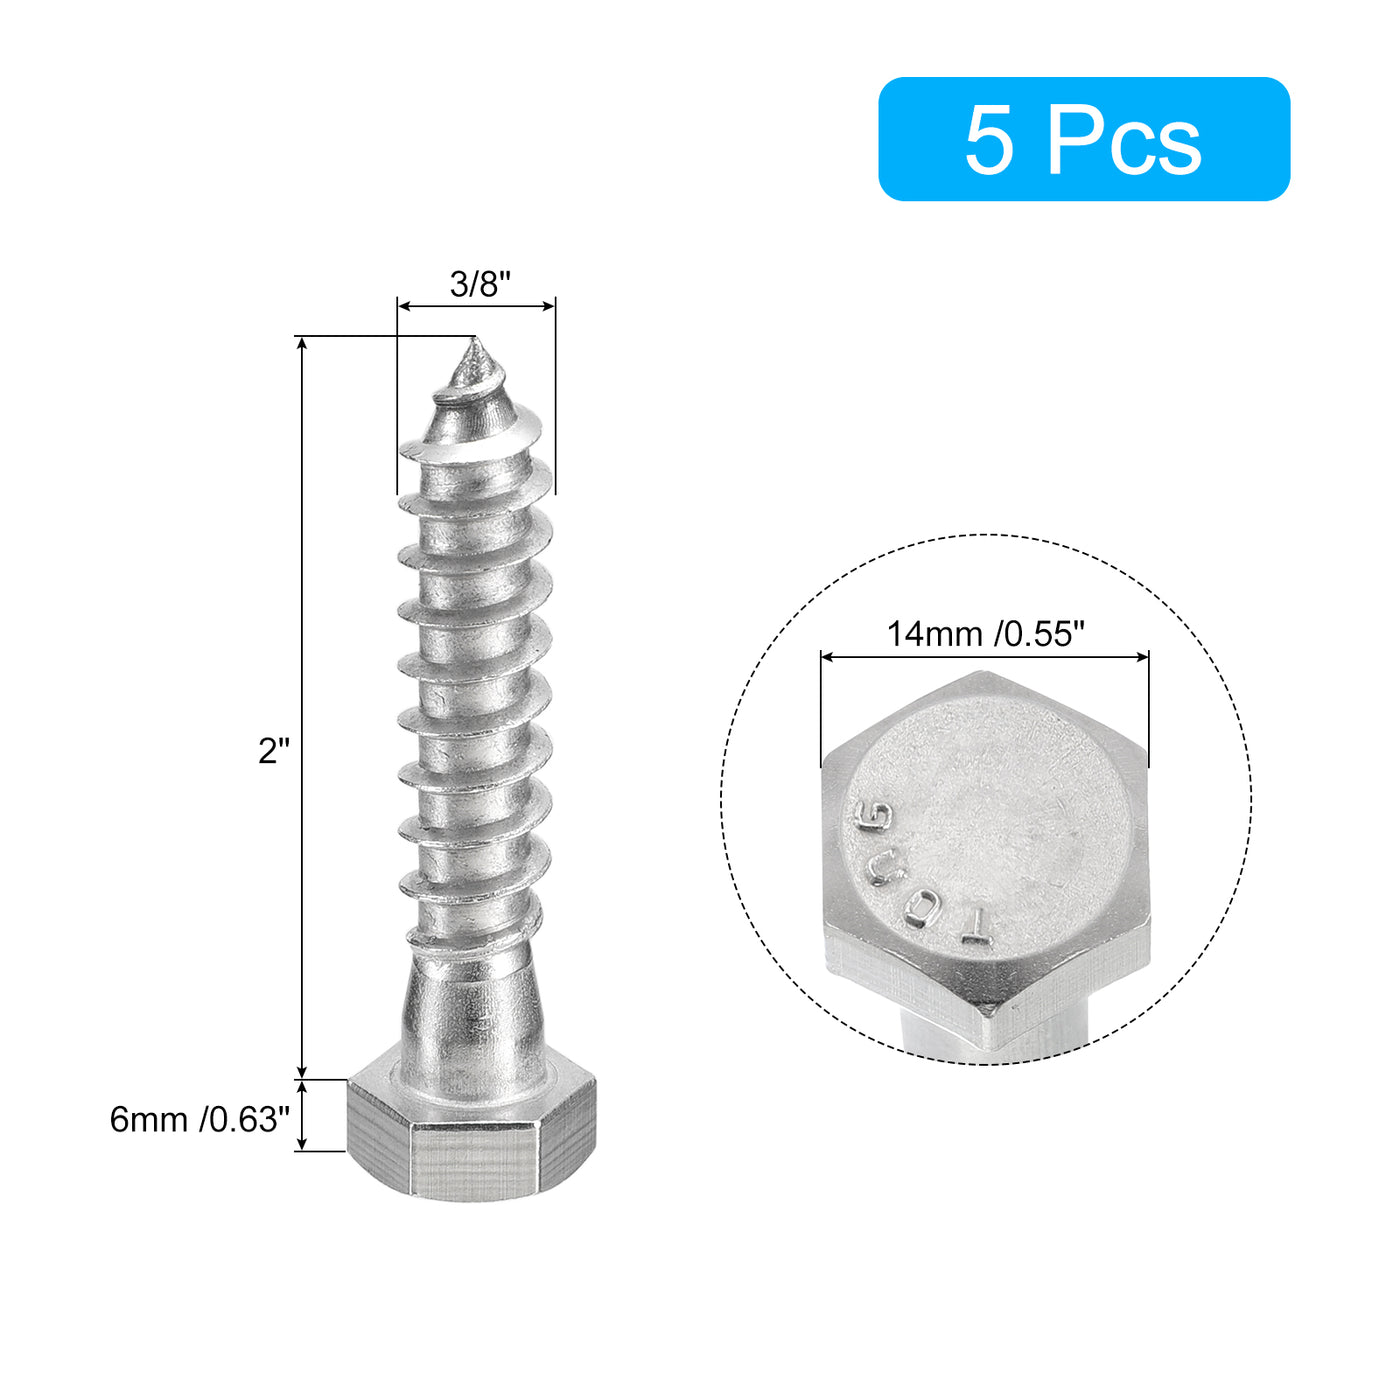 uxcell Uxcell Hex Head Lag Screws Bolts, 5pcs 3/8" x 2" 304 Stainless Steel Wood Screws